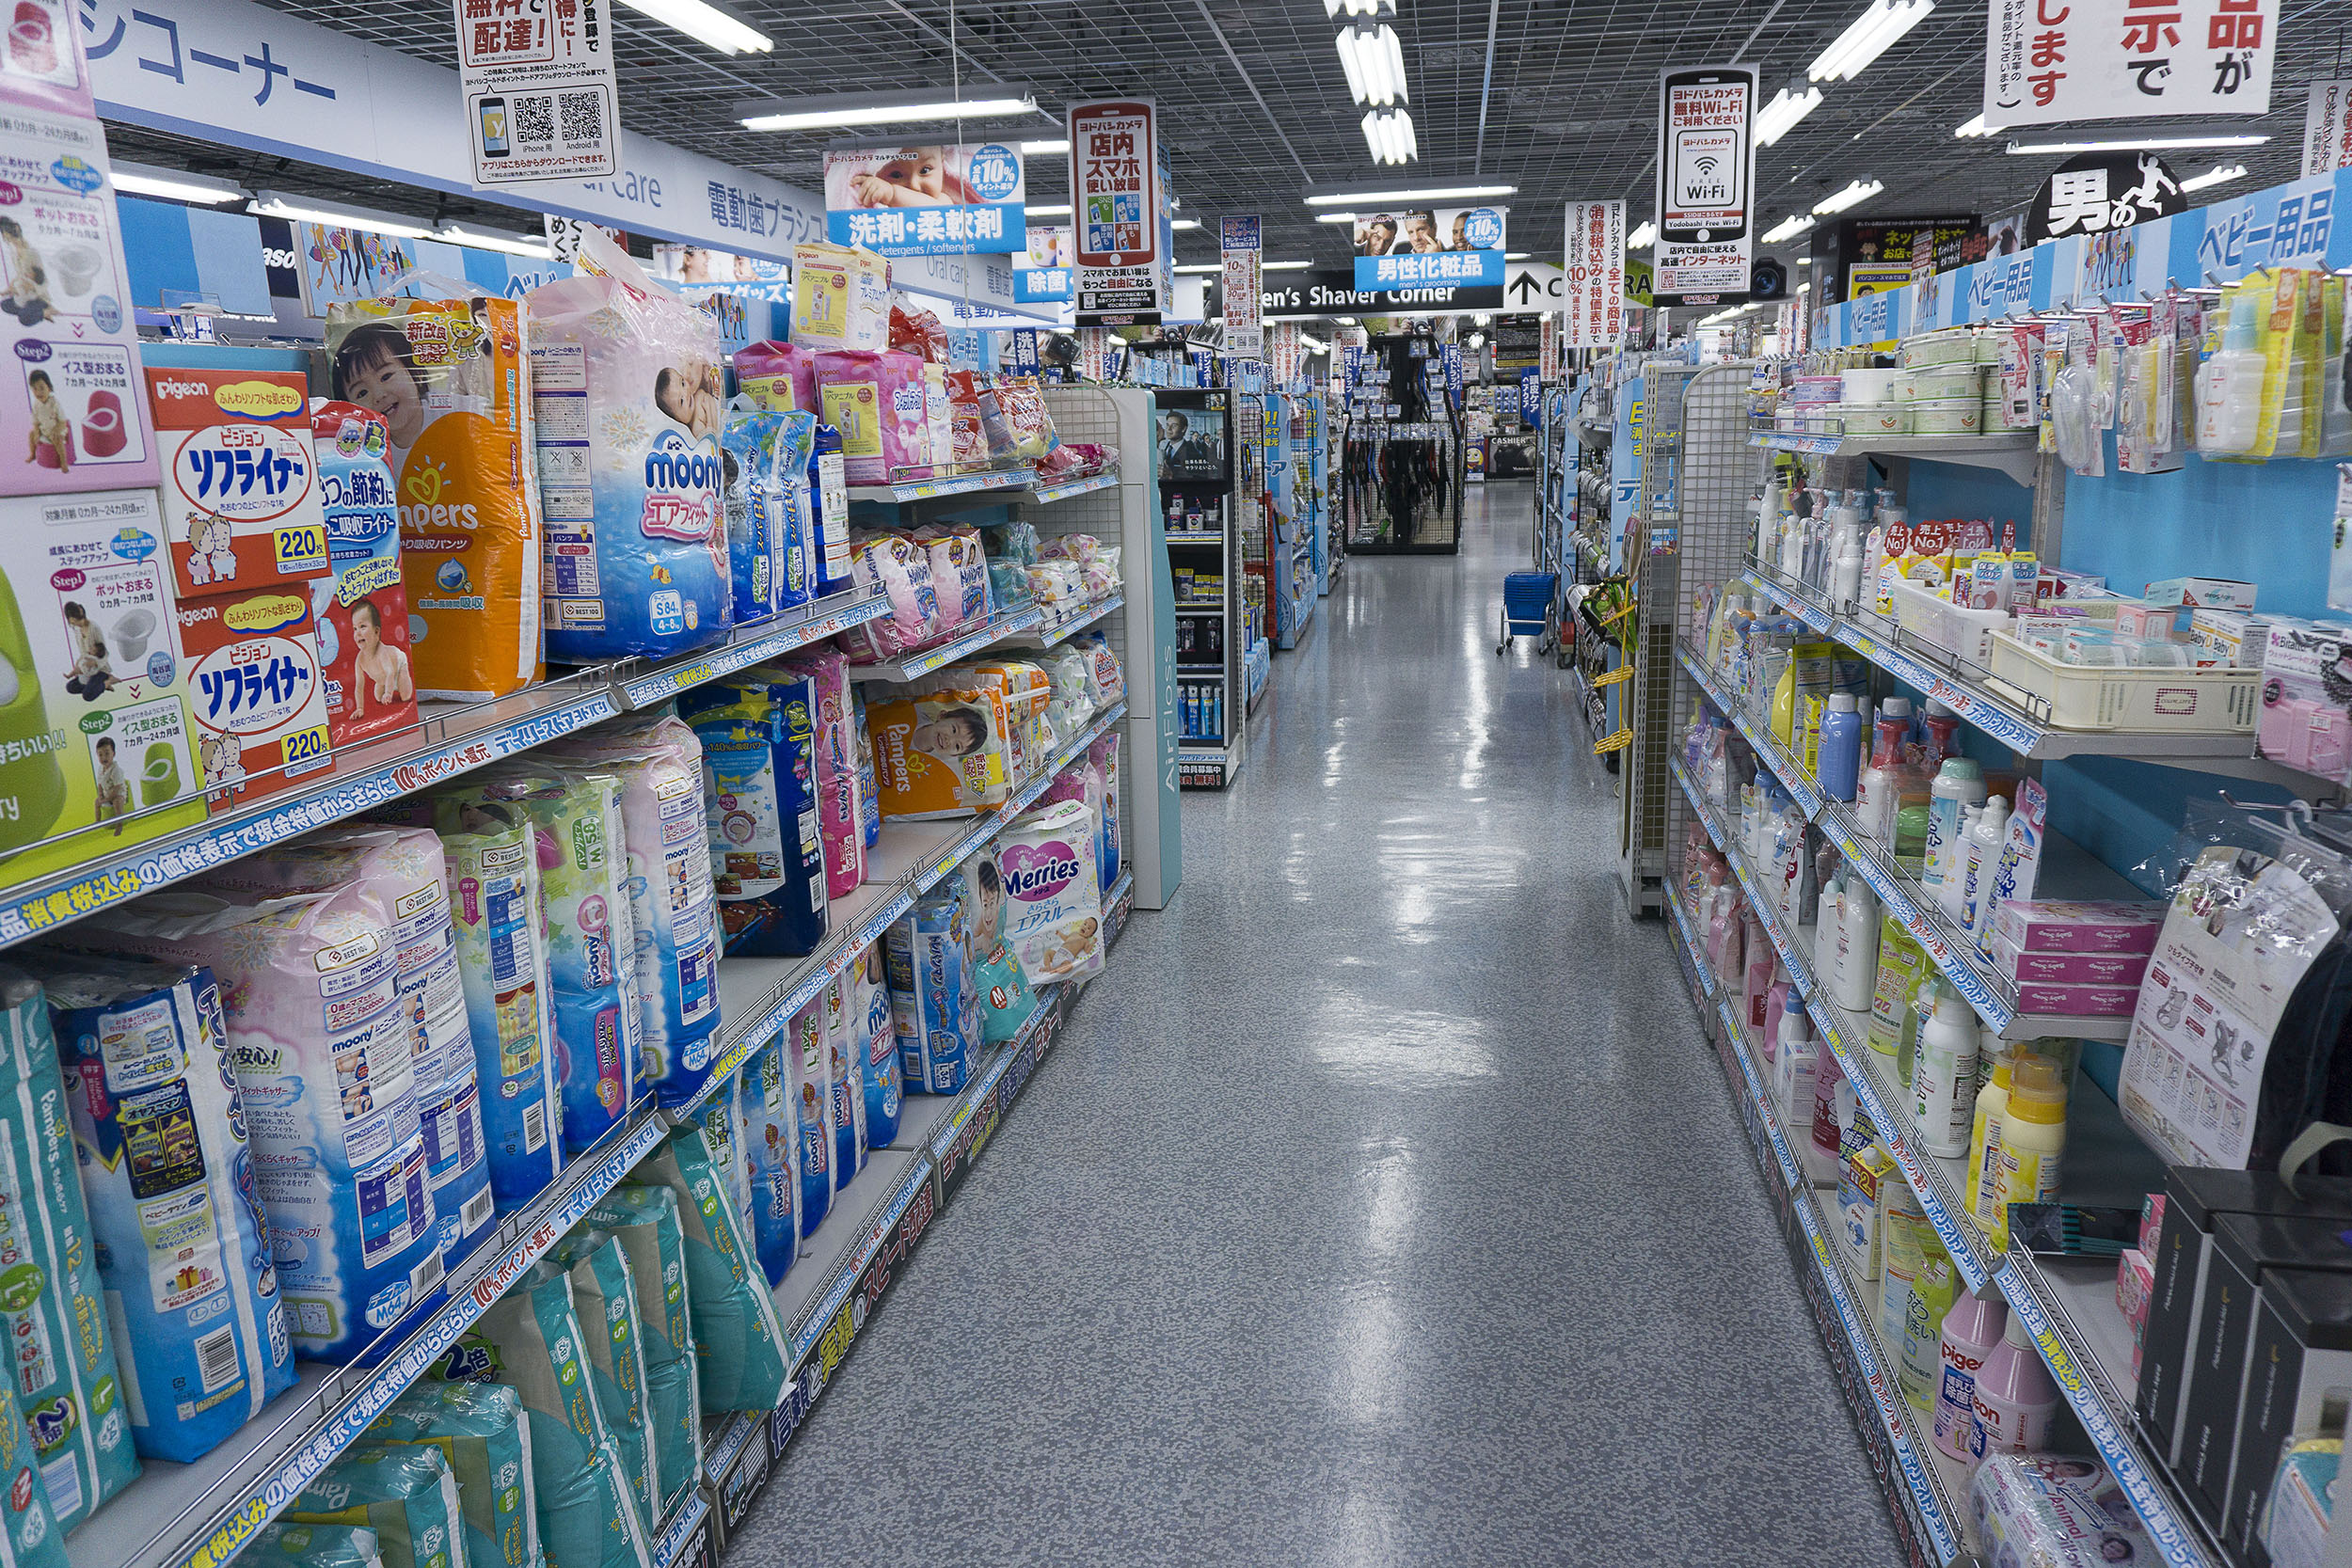 Buying nappies/diapers in Japan